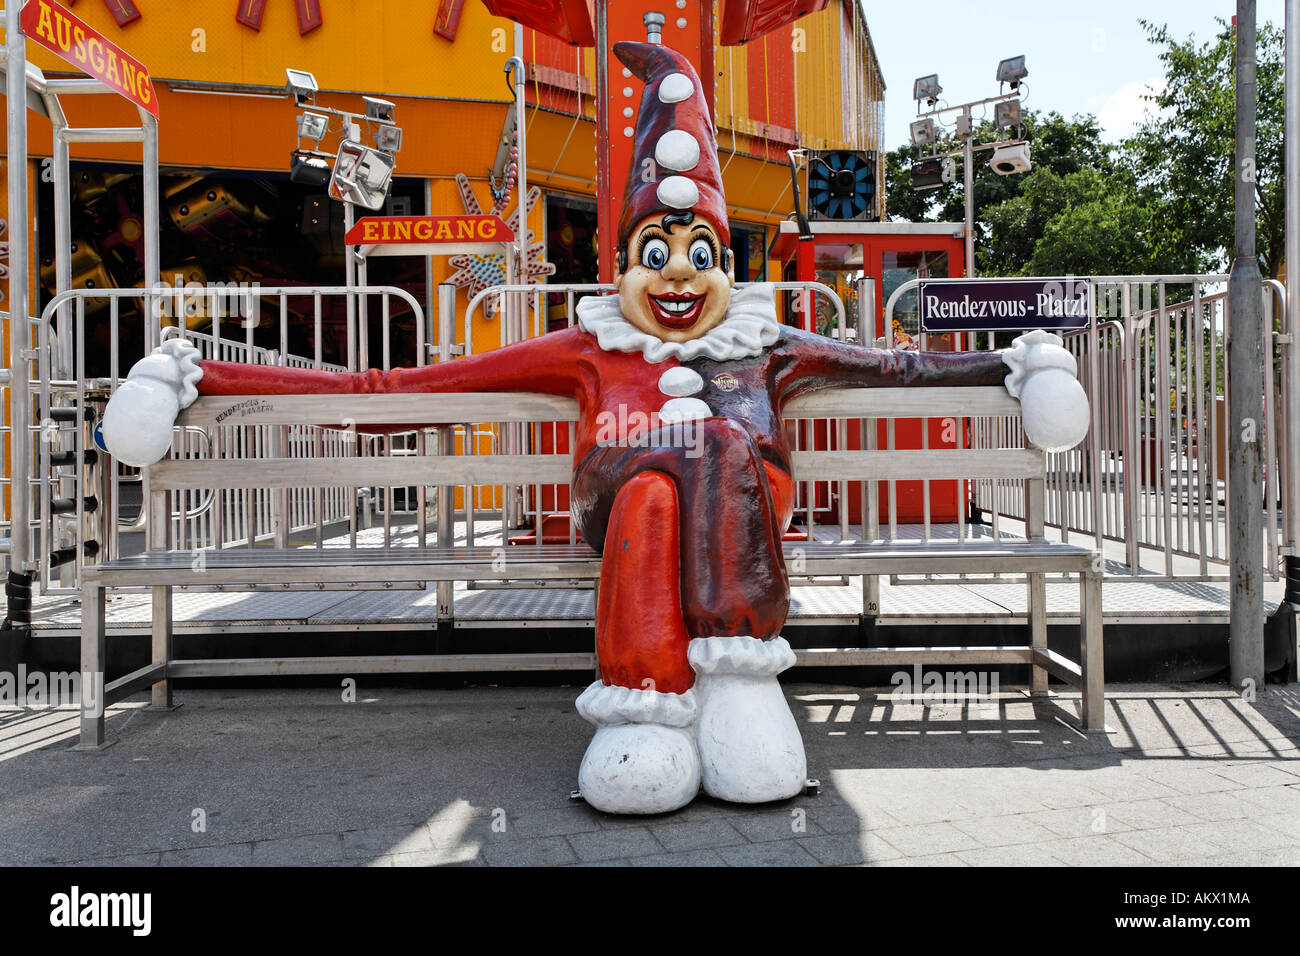 Clown figure sitting at the rendezvous spot in the Prater, Vienna, Austria Stock Photo